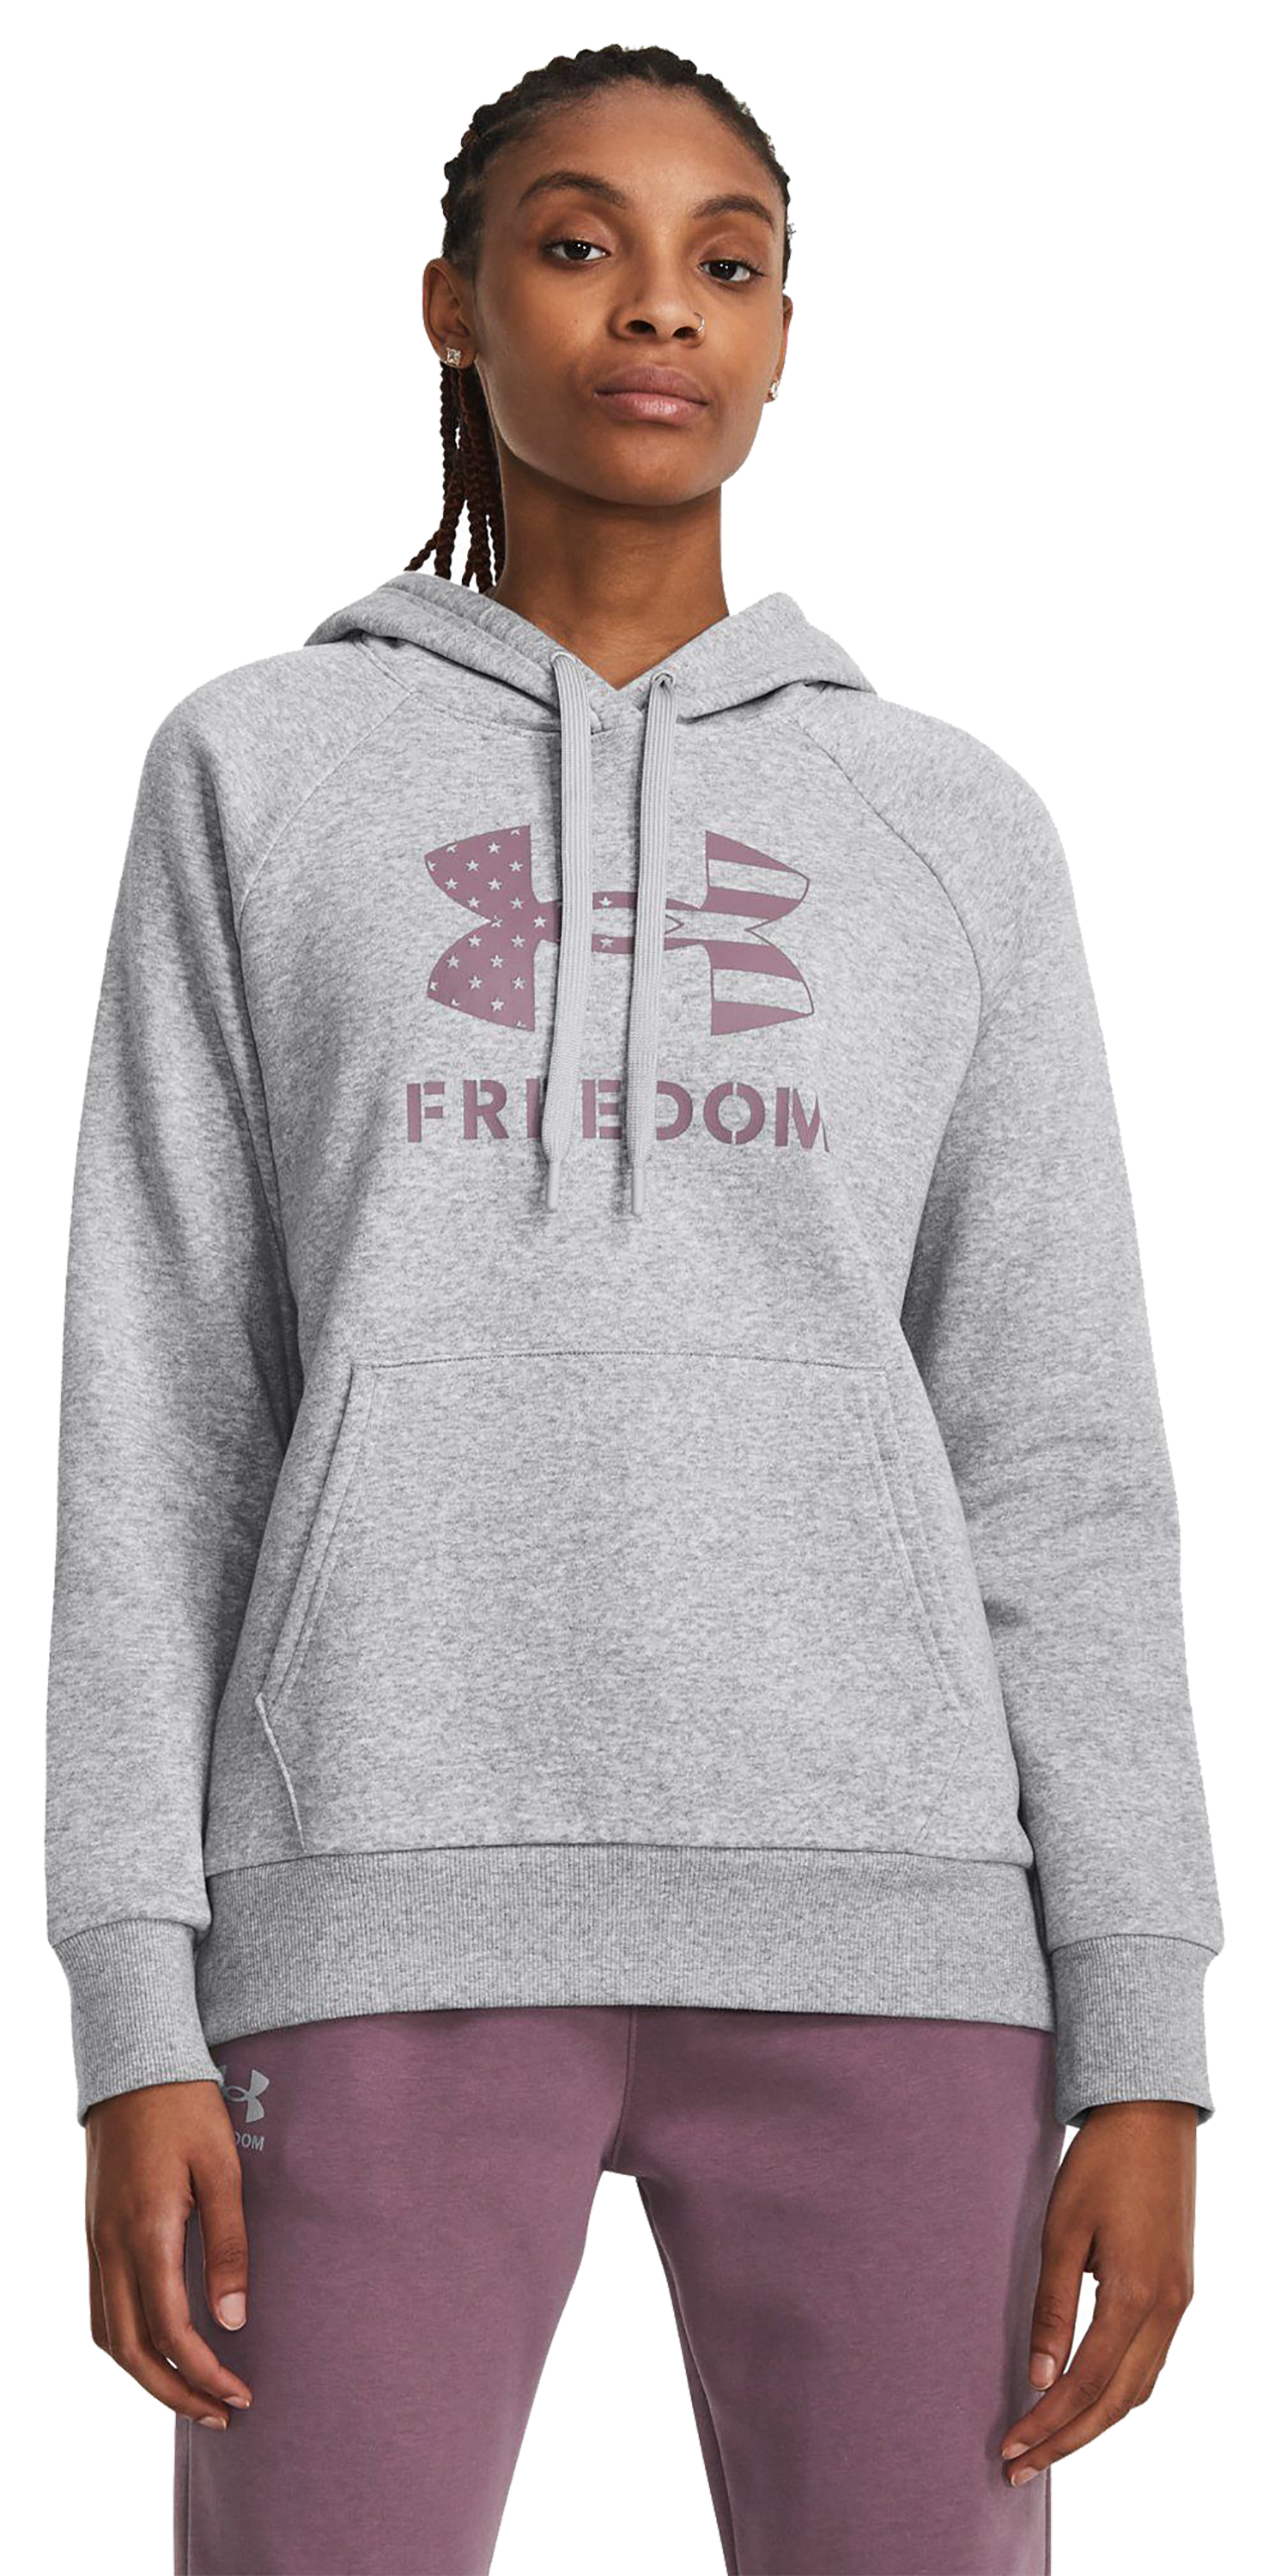 Under Armour Freedom Logo Rival Long-Sleeve Hoodie for Ladies - Mod Gray/Misty Purple - XS